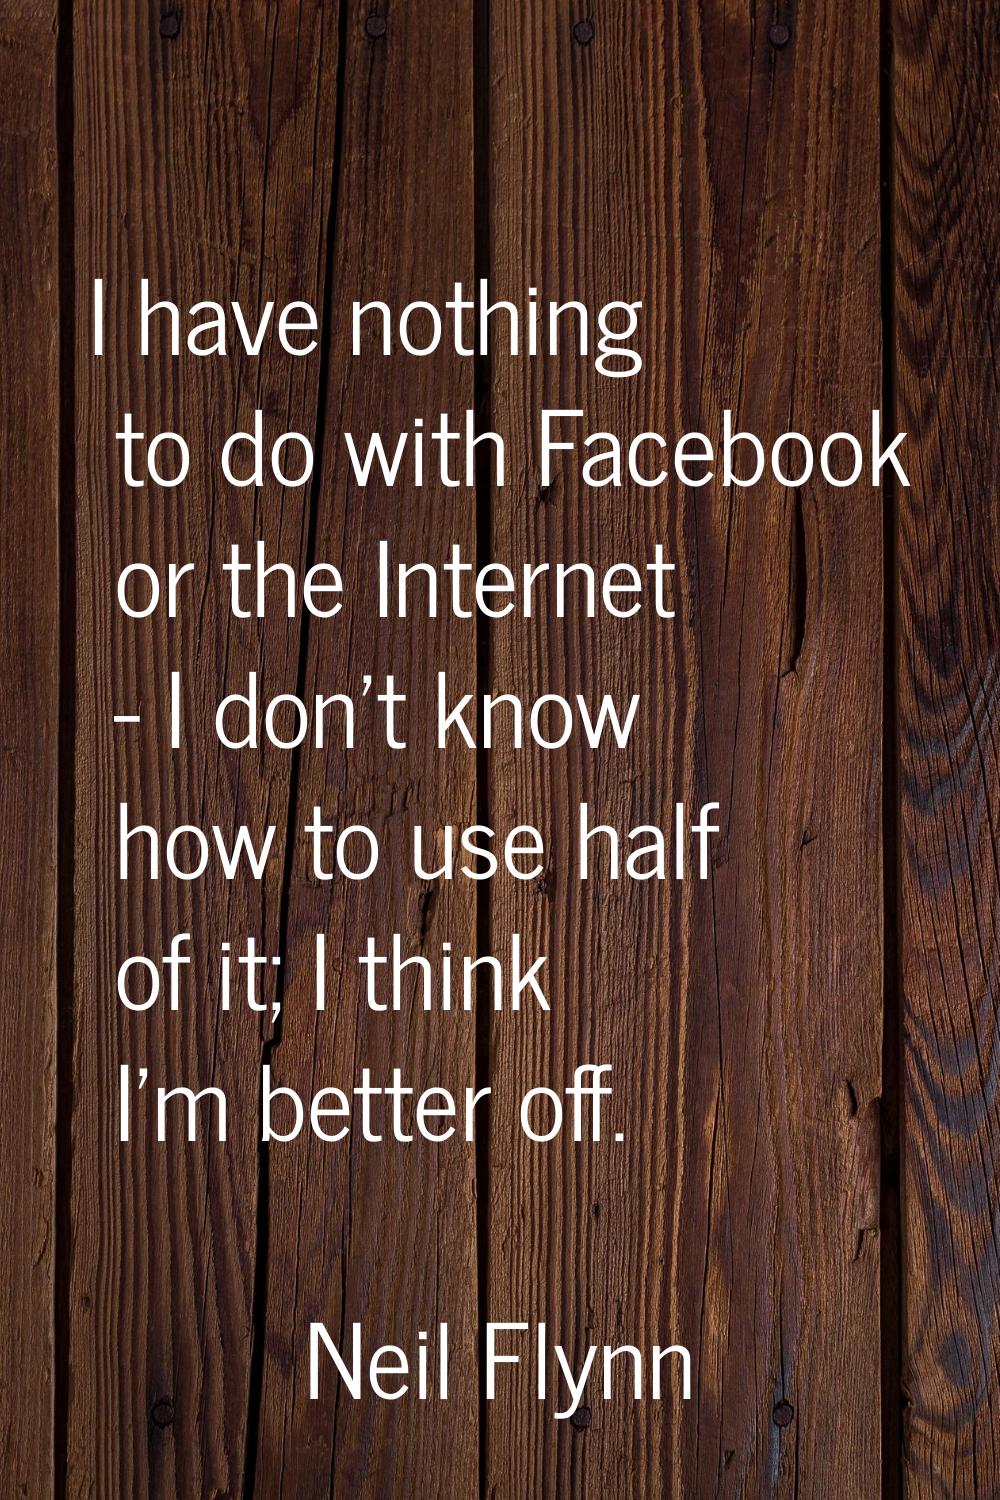 I have nothing to do with Facebook or the Internet - I don't know how to use half of it; I think I'